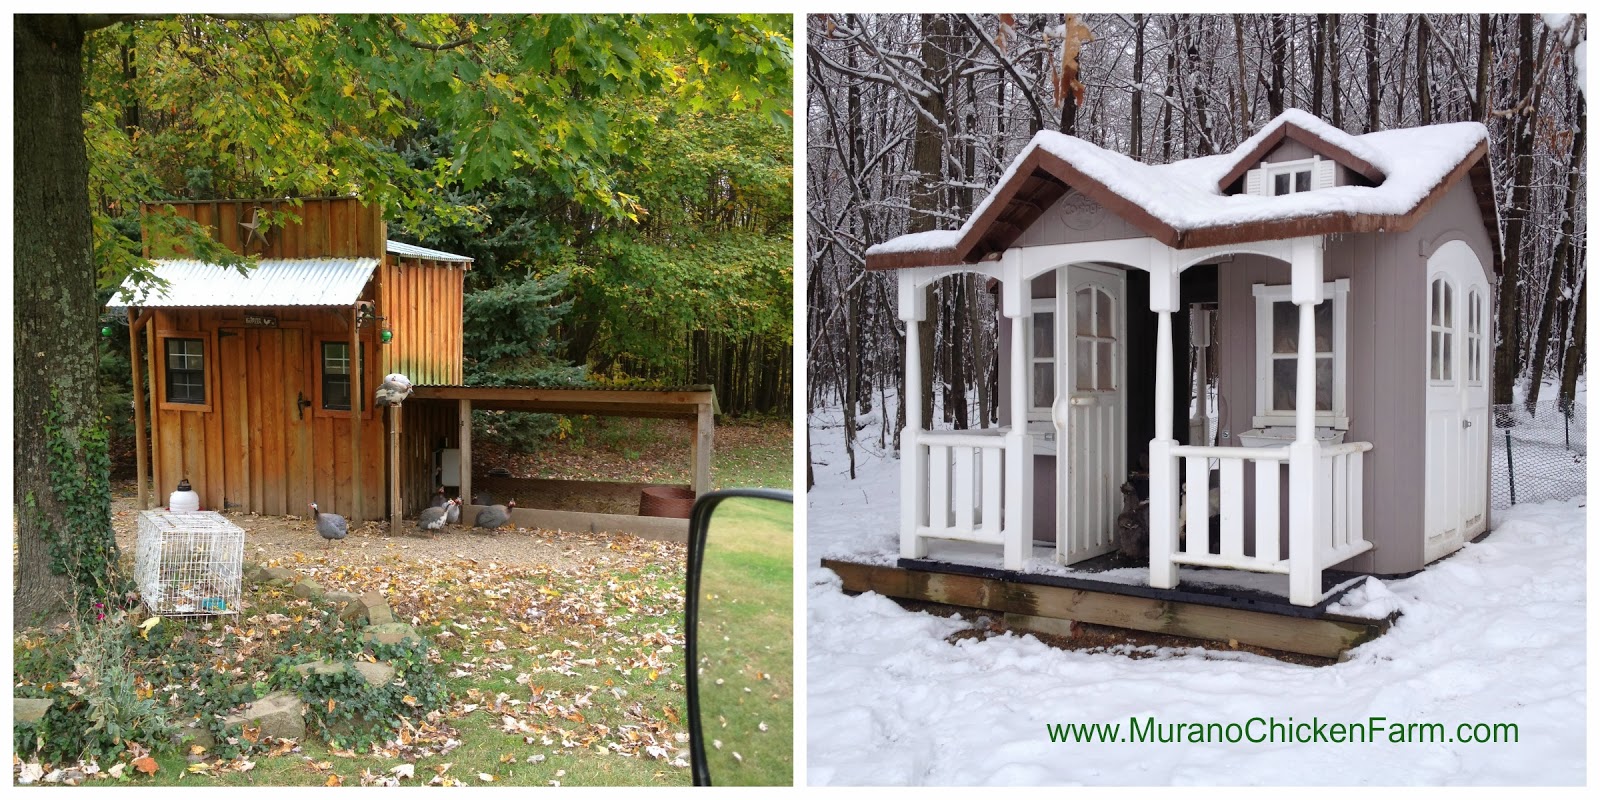 Murano Chicken Farm: Winter chicken coops: the good, bad and ugly